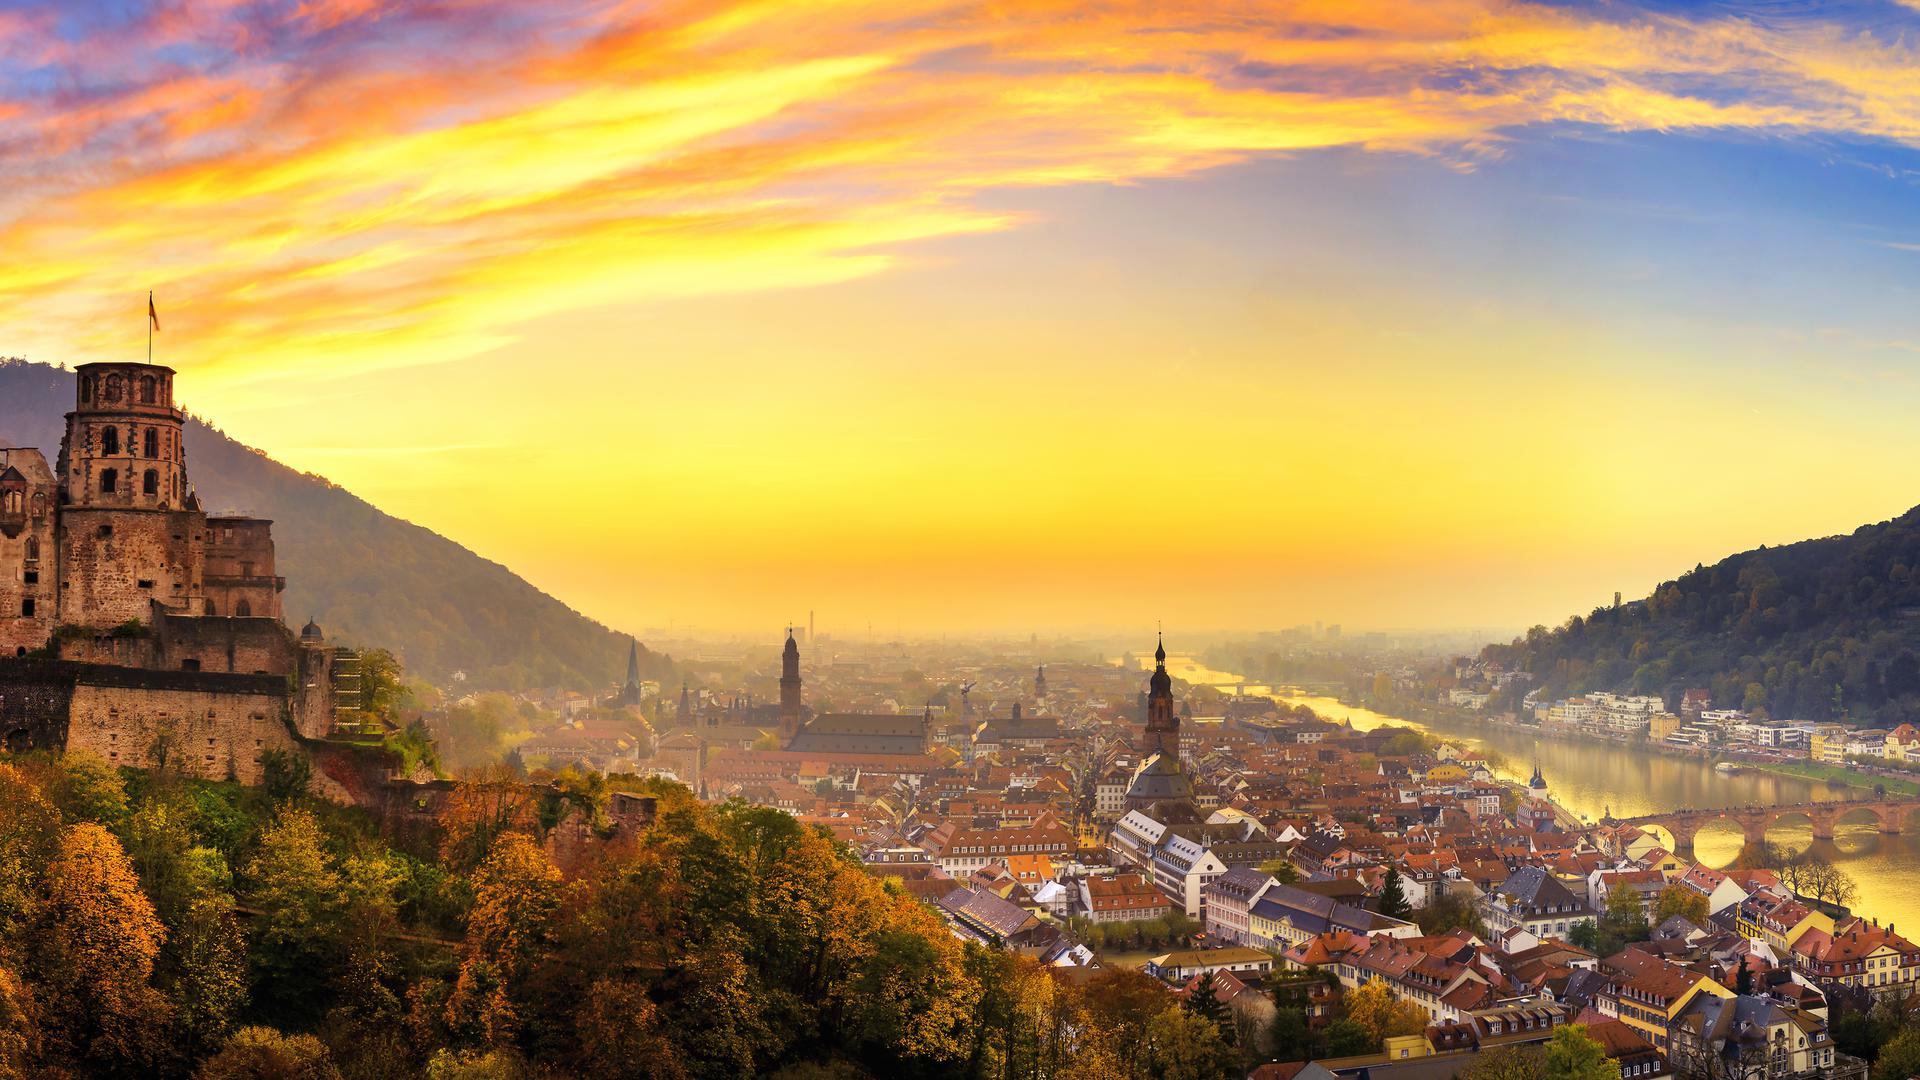 Flanked by a red stone castle and straddling the River Neckar, the pretty, half-timbered houses and cobblestone streets of Heidelberg are less than 3 hours' drive from Luxembourg City 